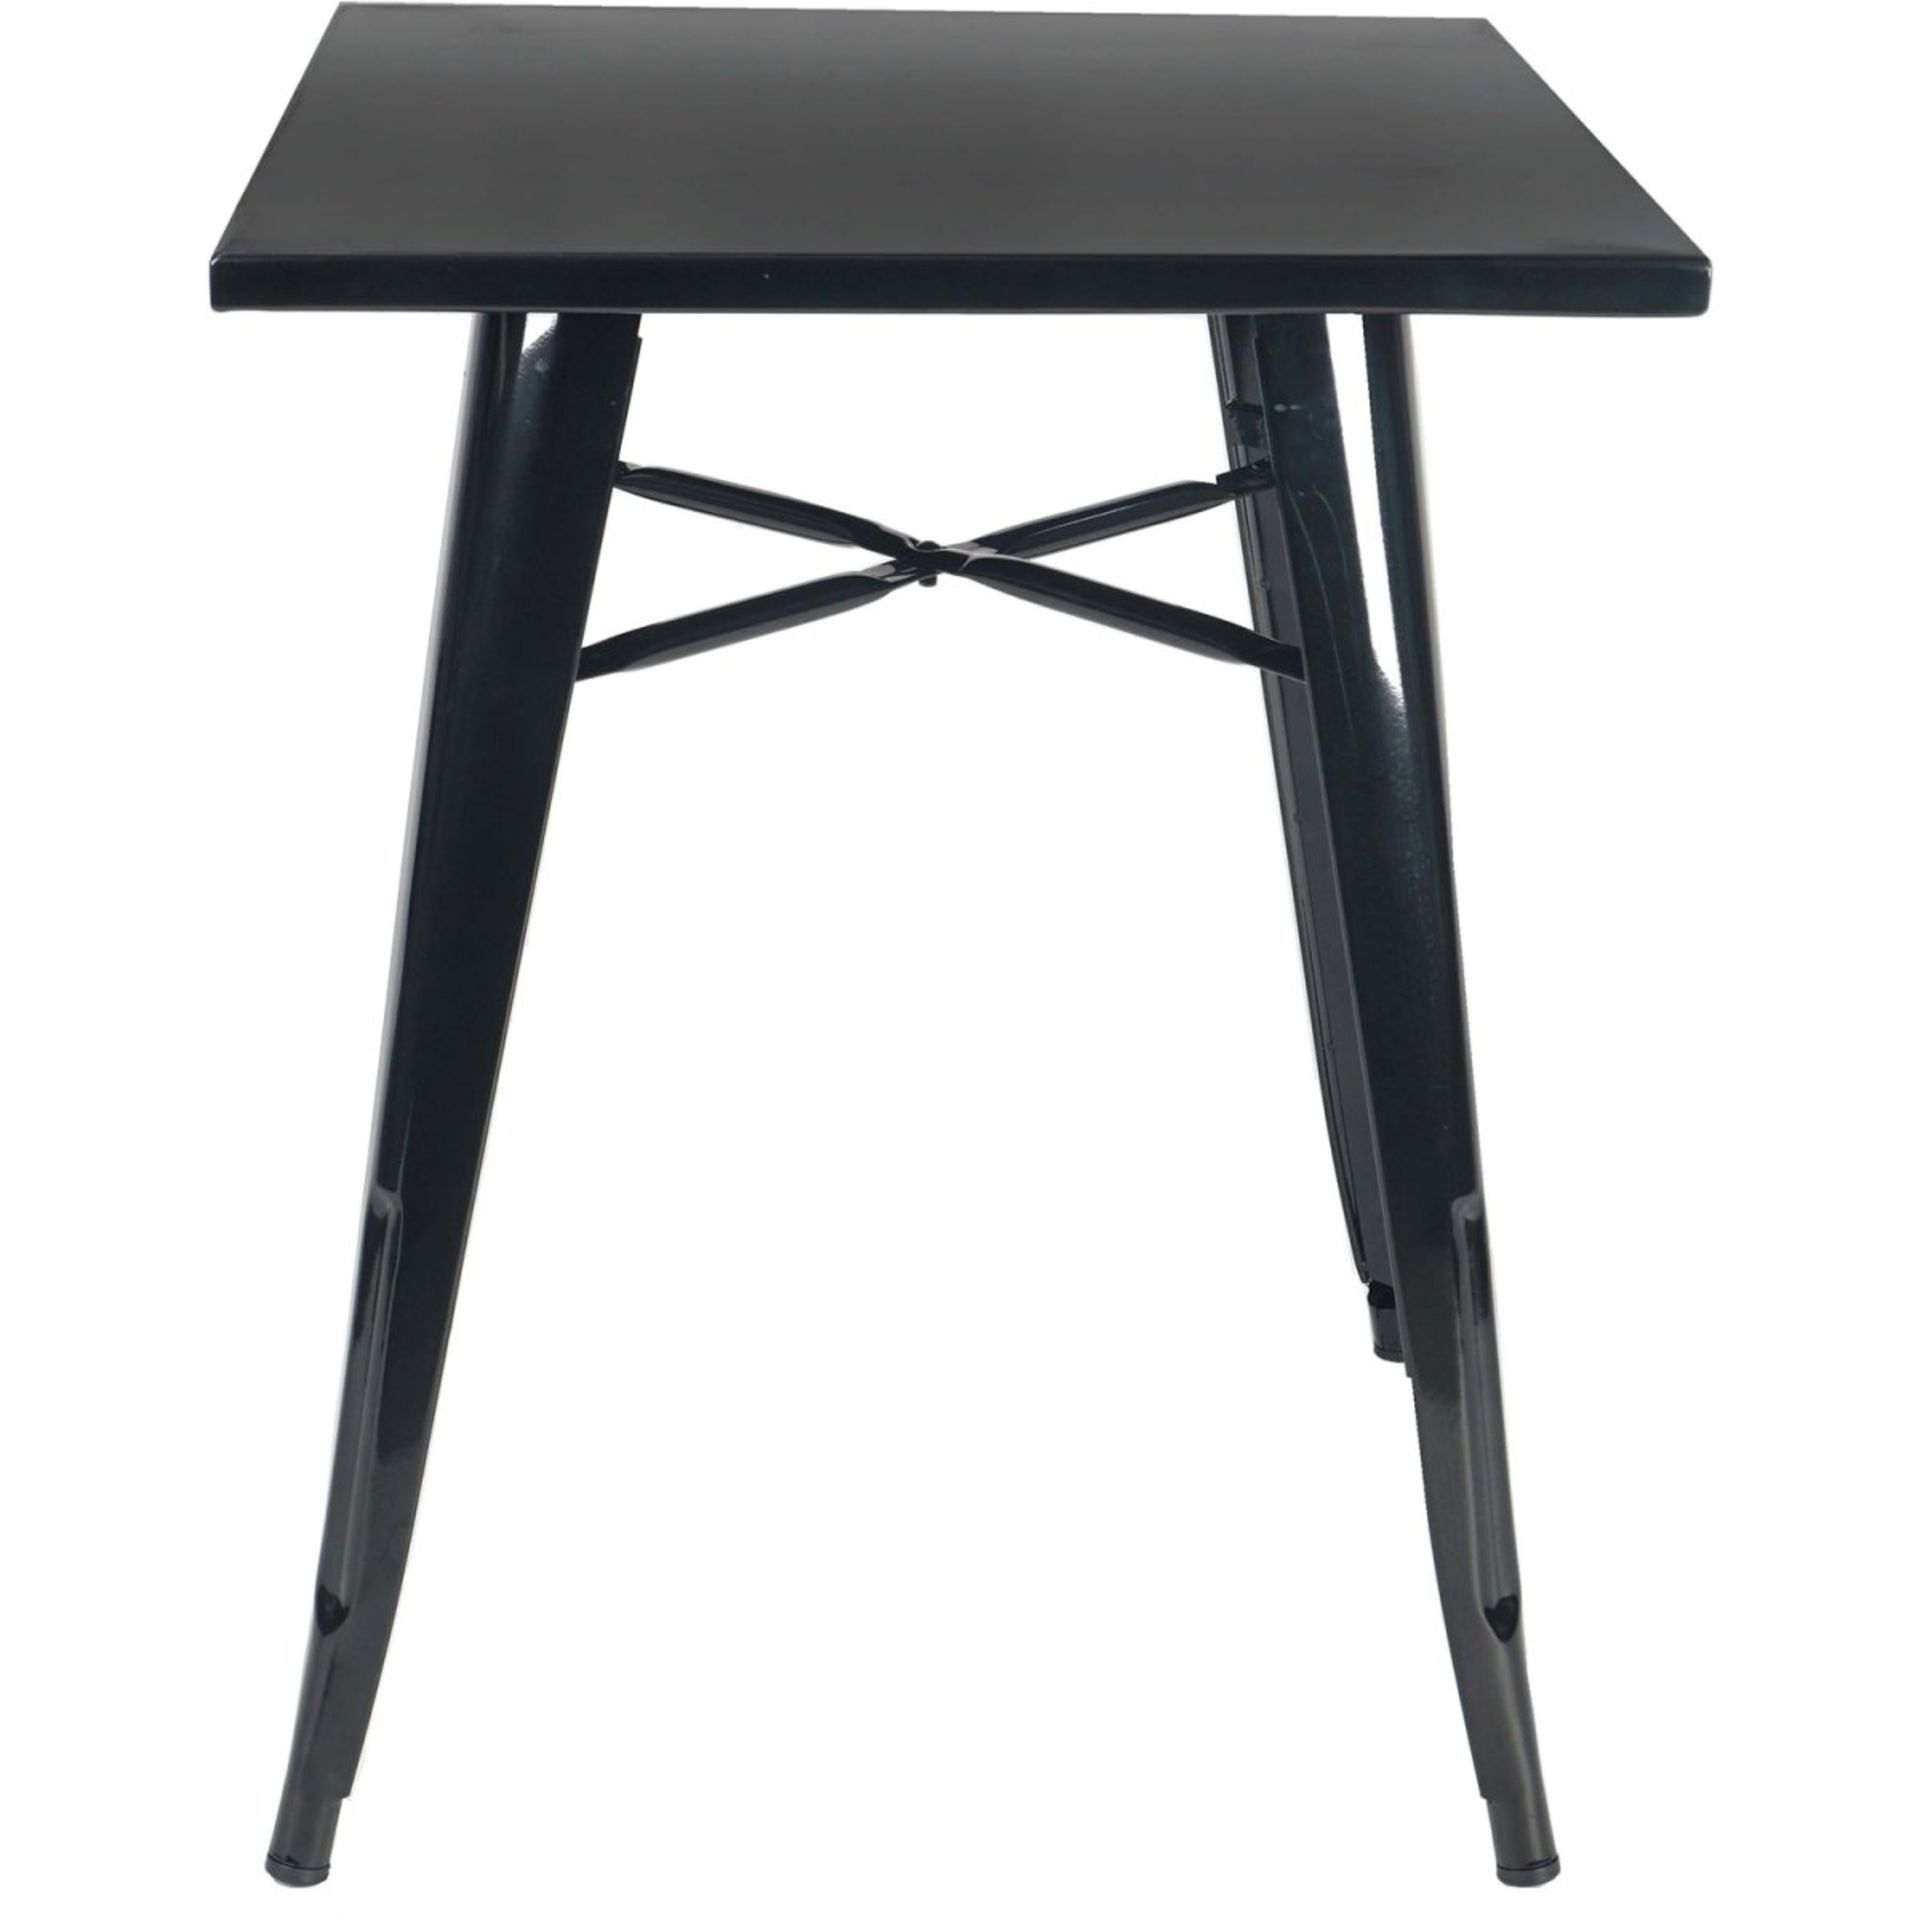 1 x Tolix Industrial Style Outdoor Bistro Table and Chair Set in Black - Includes 1 x Table and 4 - Image 3 of 7